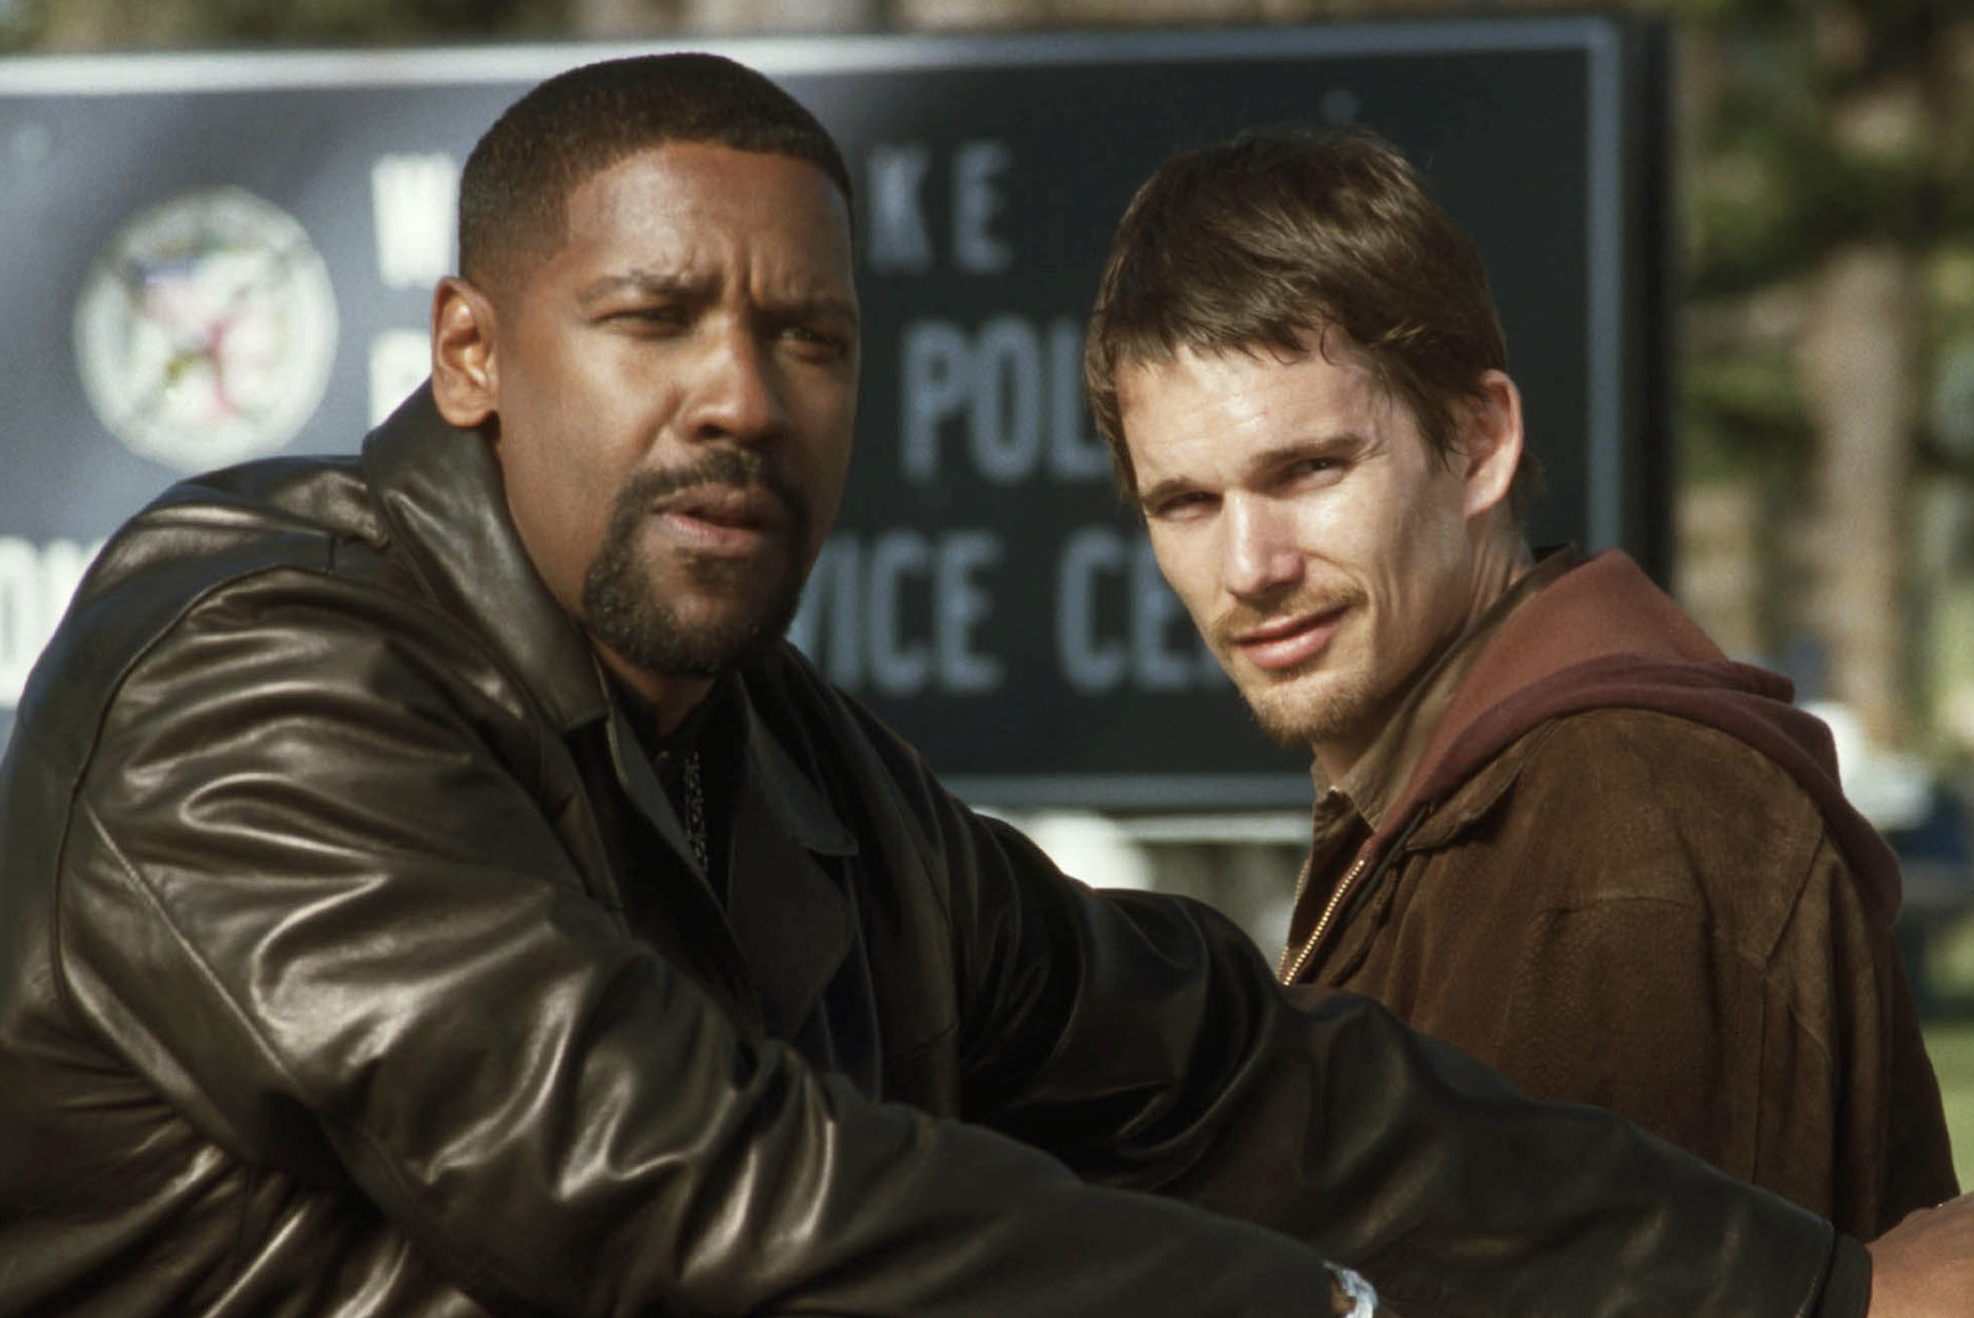 Ethan Hawke Lost the Oscar for ‘Training Day’ and Denzel Washington Whispered in His Ear That Losing Was Better...